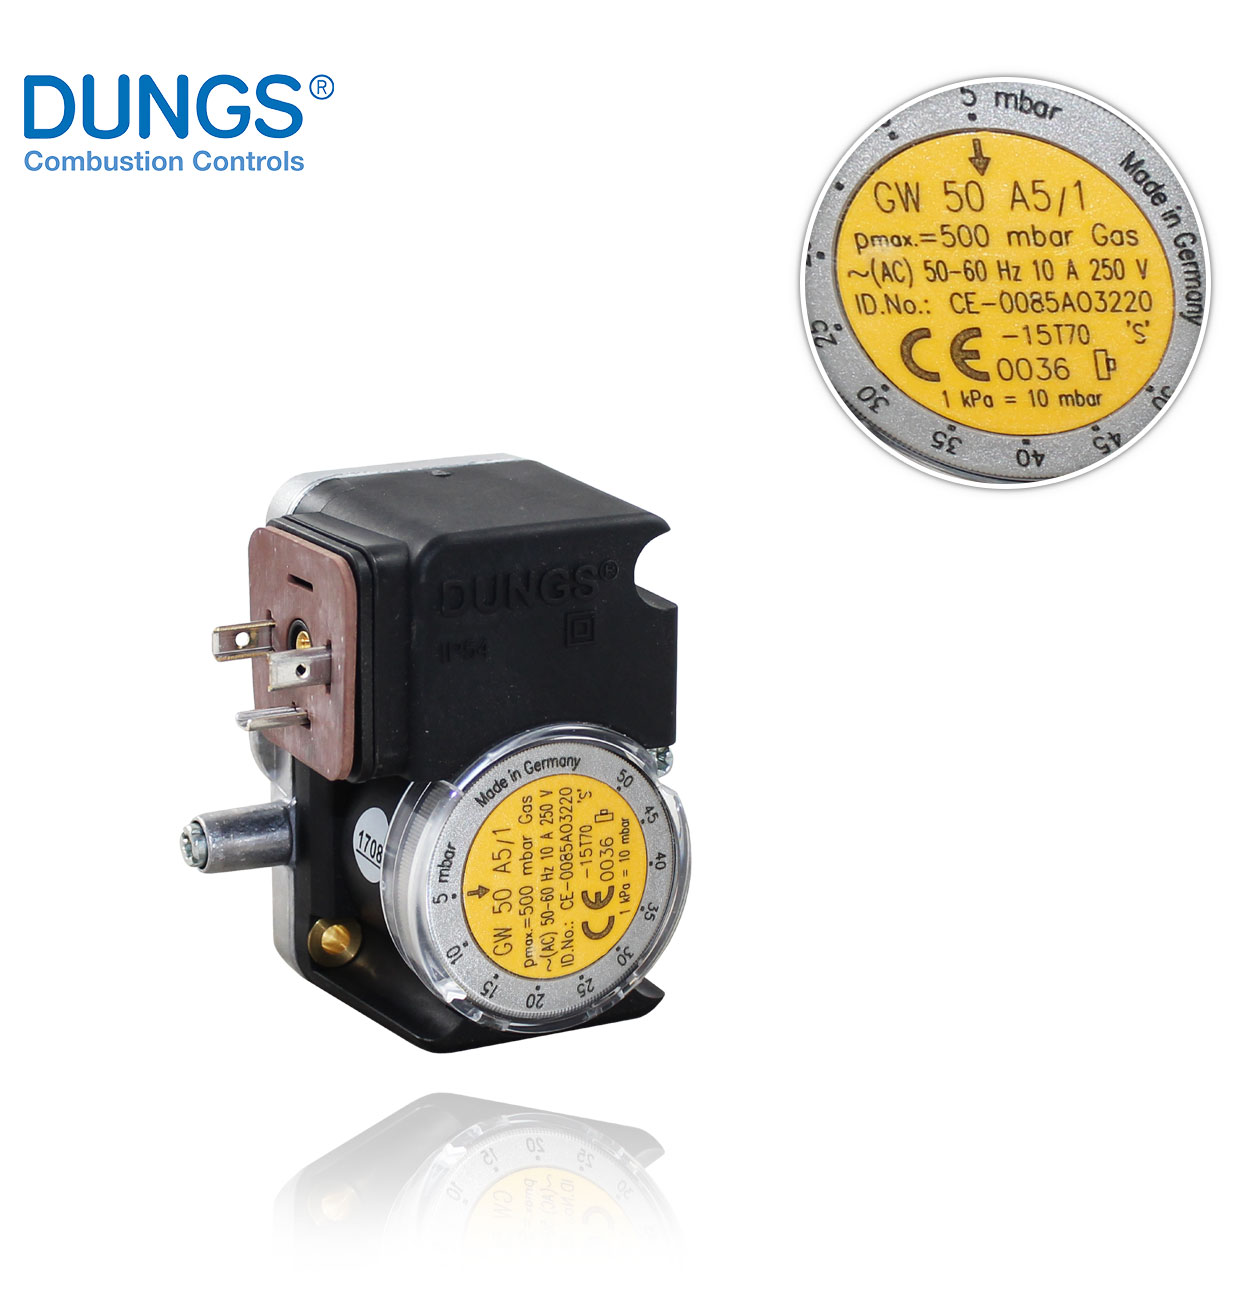 GW   50 A5/1  PRESSURE SWITCH DUNGS